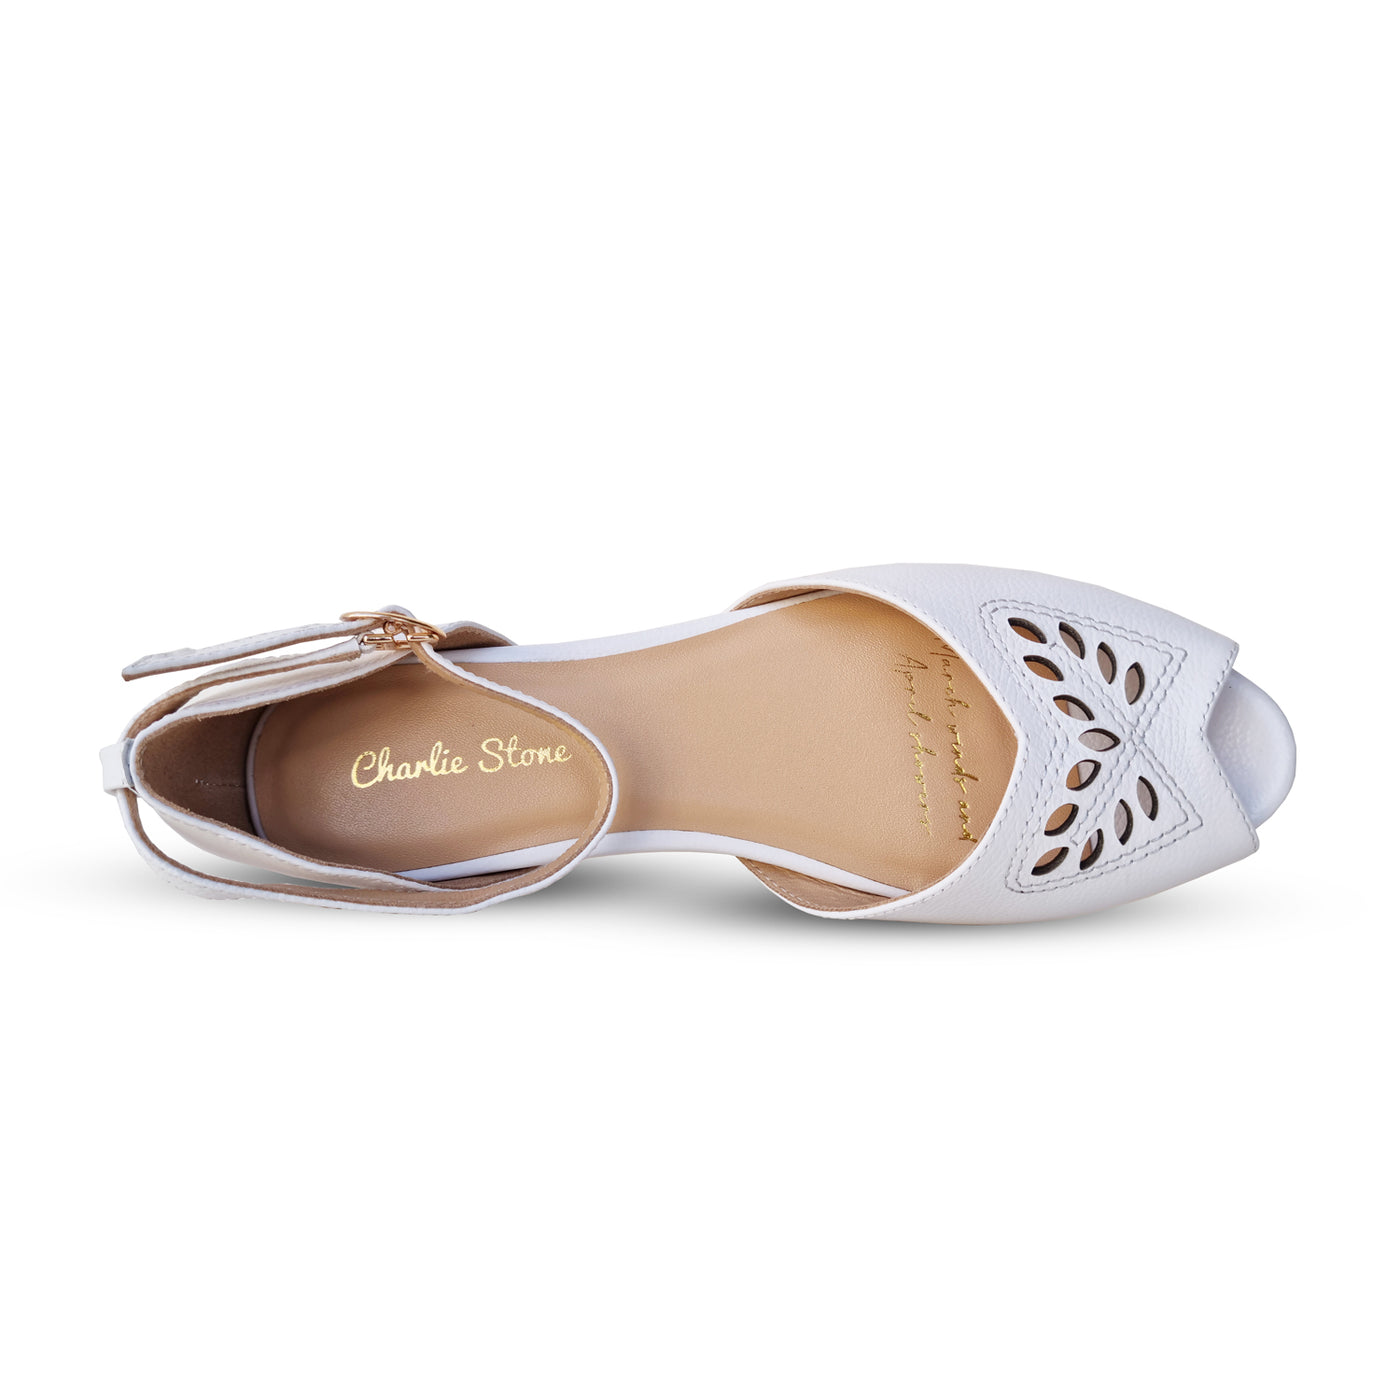 Charlie Stone Vintage Inspired Flats Retro 1940’s 1950’s Style Ladies Shoes white ballerina